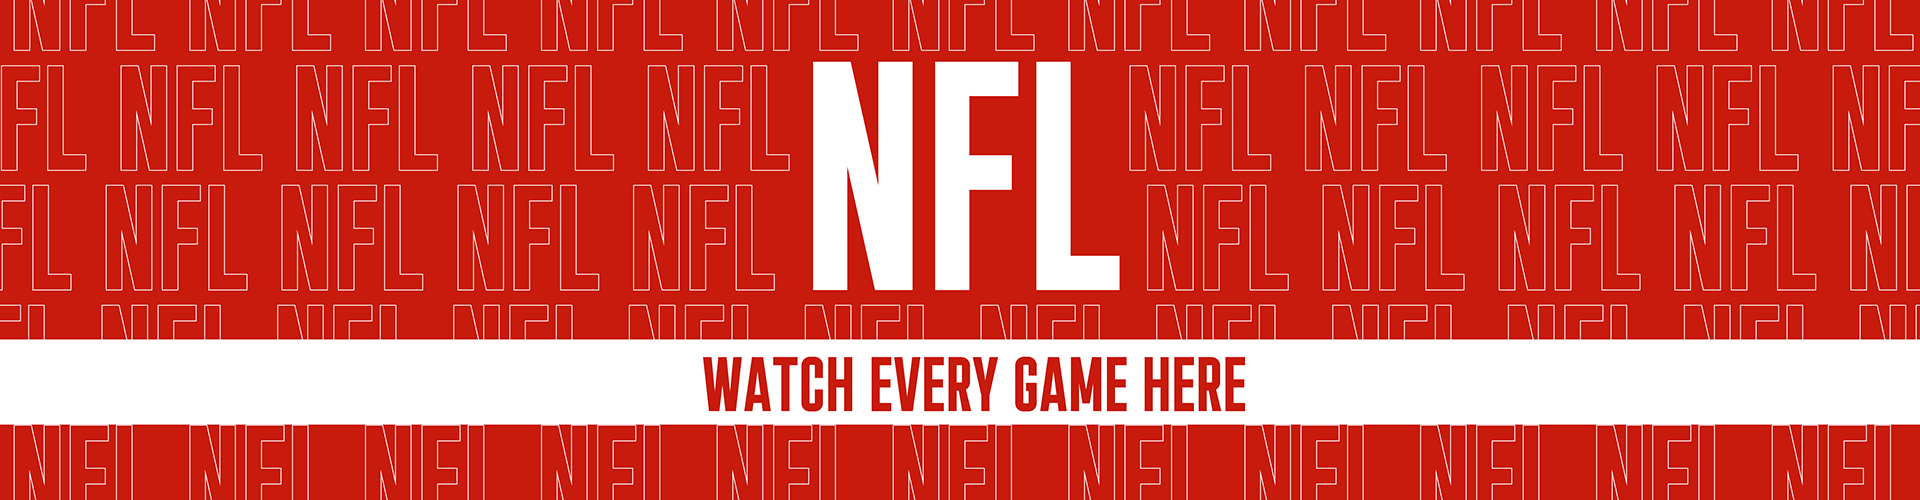 Watch the NFL live